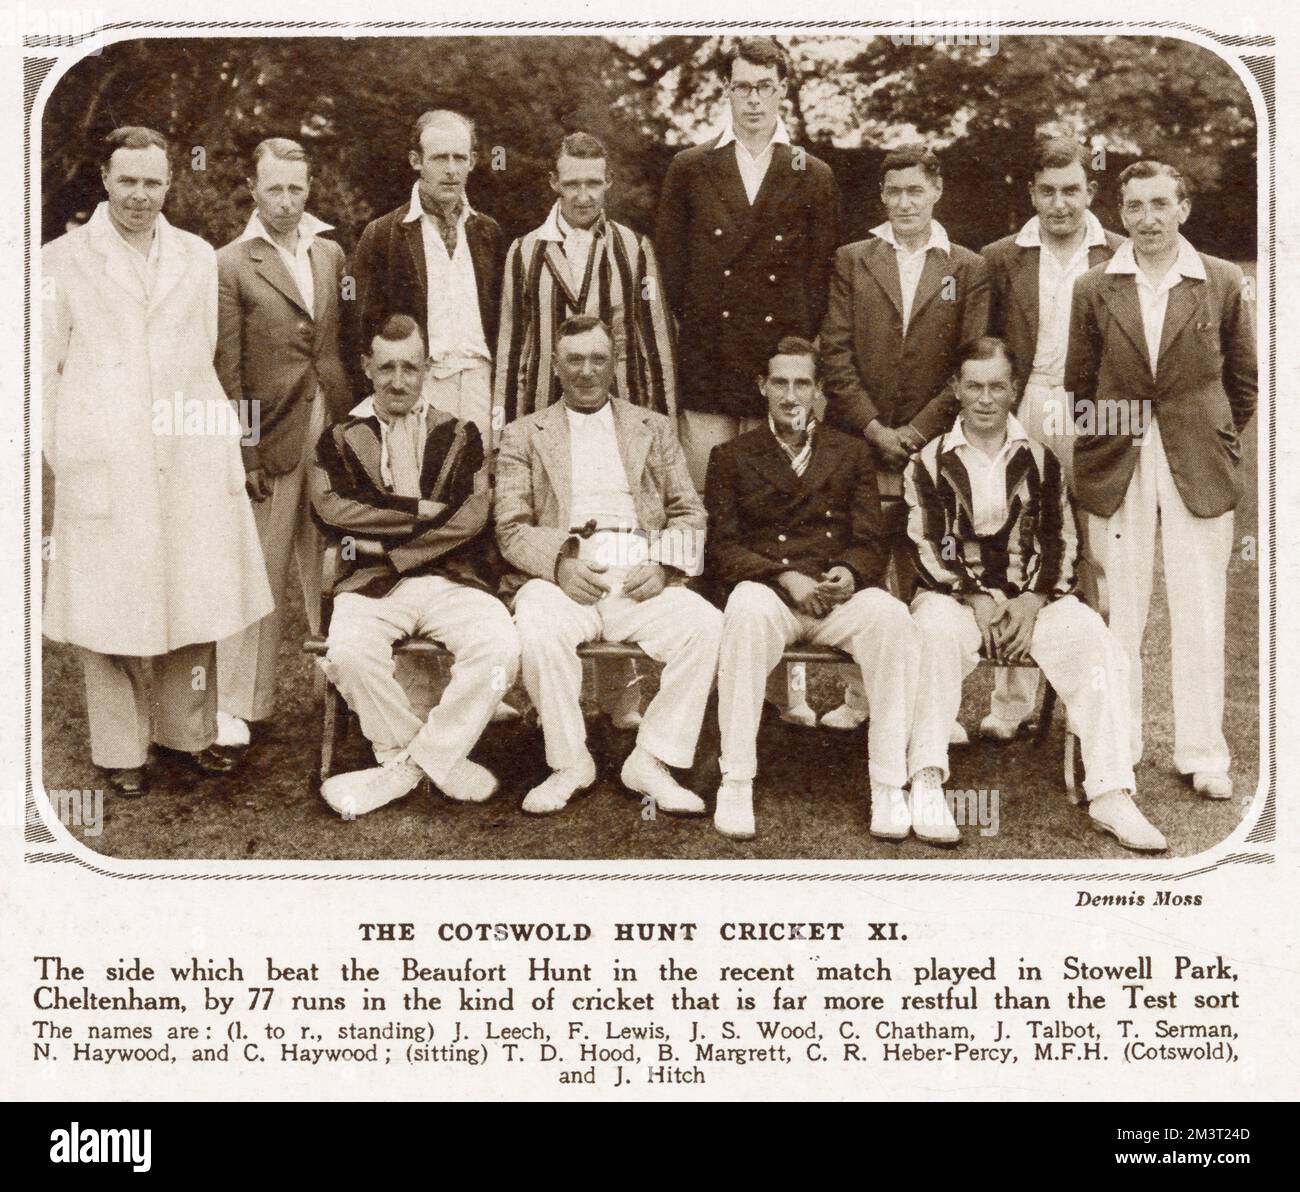 Cricket Team Photograph - The Cotswold Hunt XI which beat the Beaufort Hunt in a match at Stowell Park, Cheltenham by 77 runs. Stock Photo